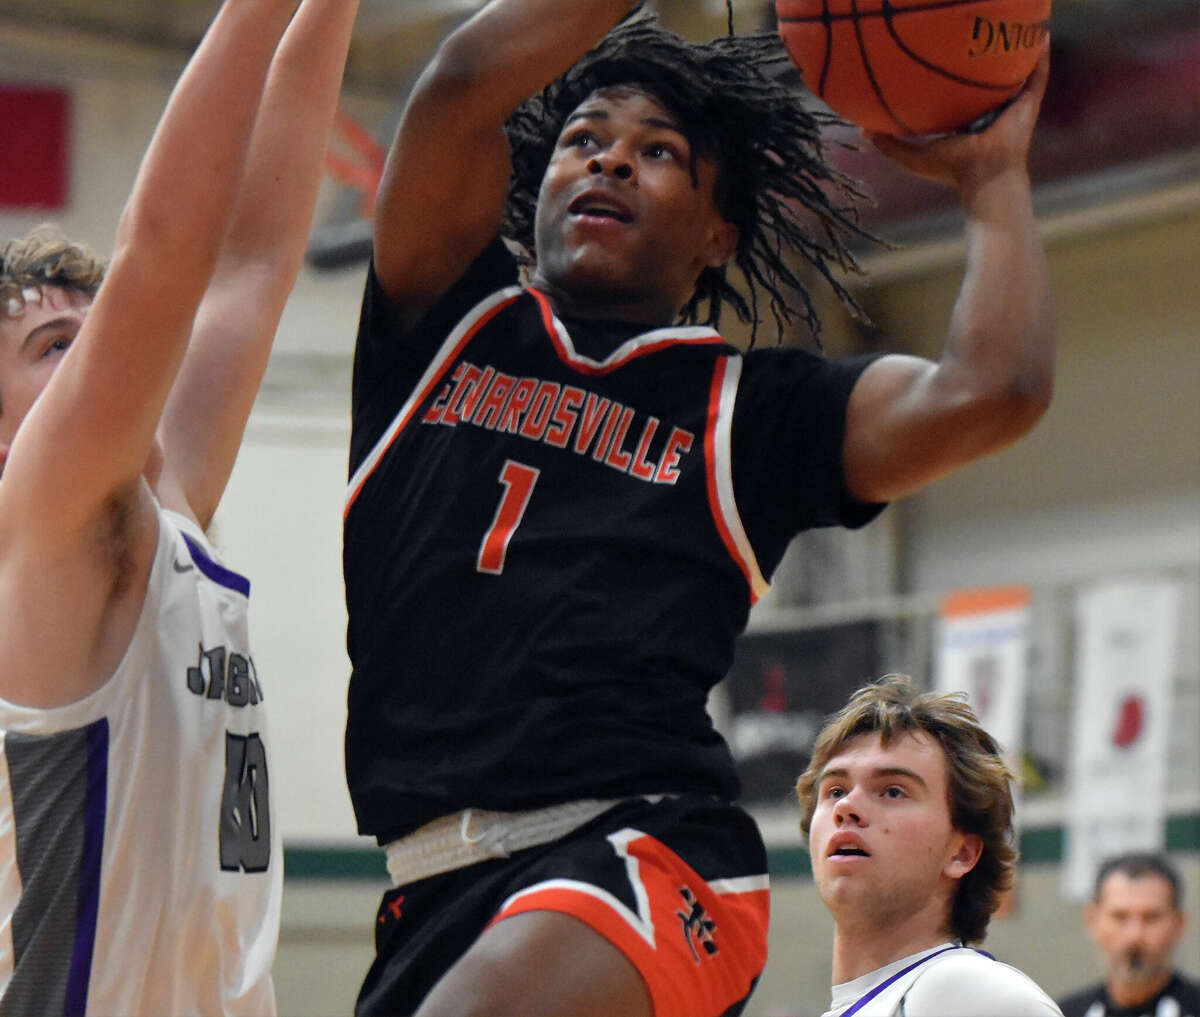 Edwardsville's AJ Tillman scores despite contact against Fort Zumwalt West in the first half of a game on Thursday in the Don Mauer Invitational at MICDS in St. Louis.